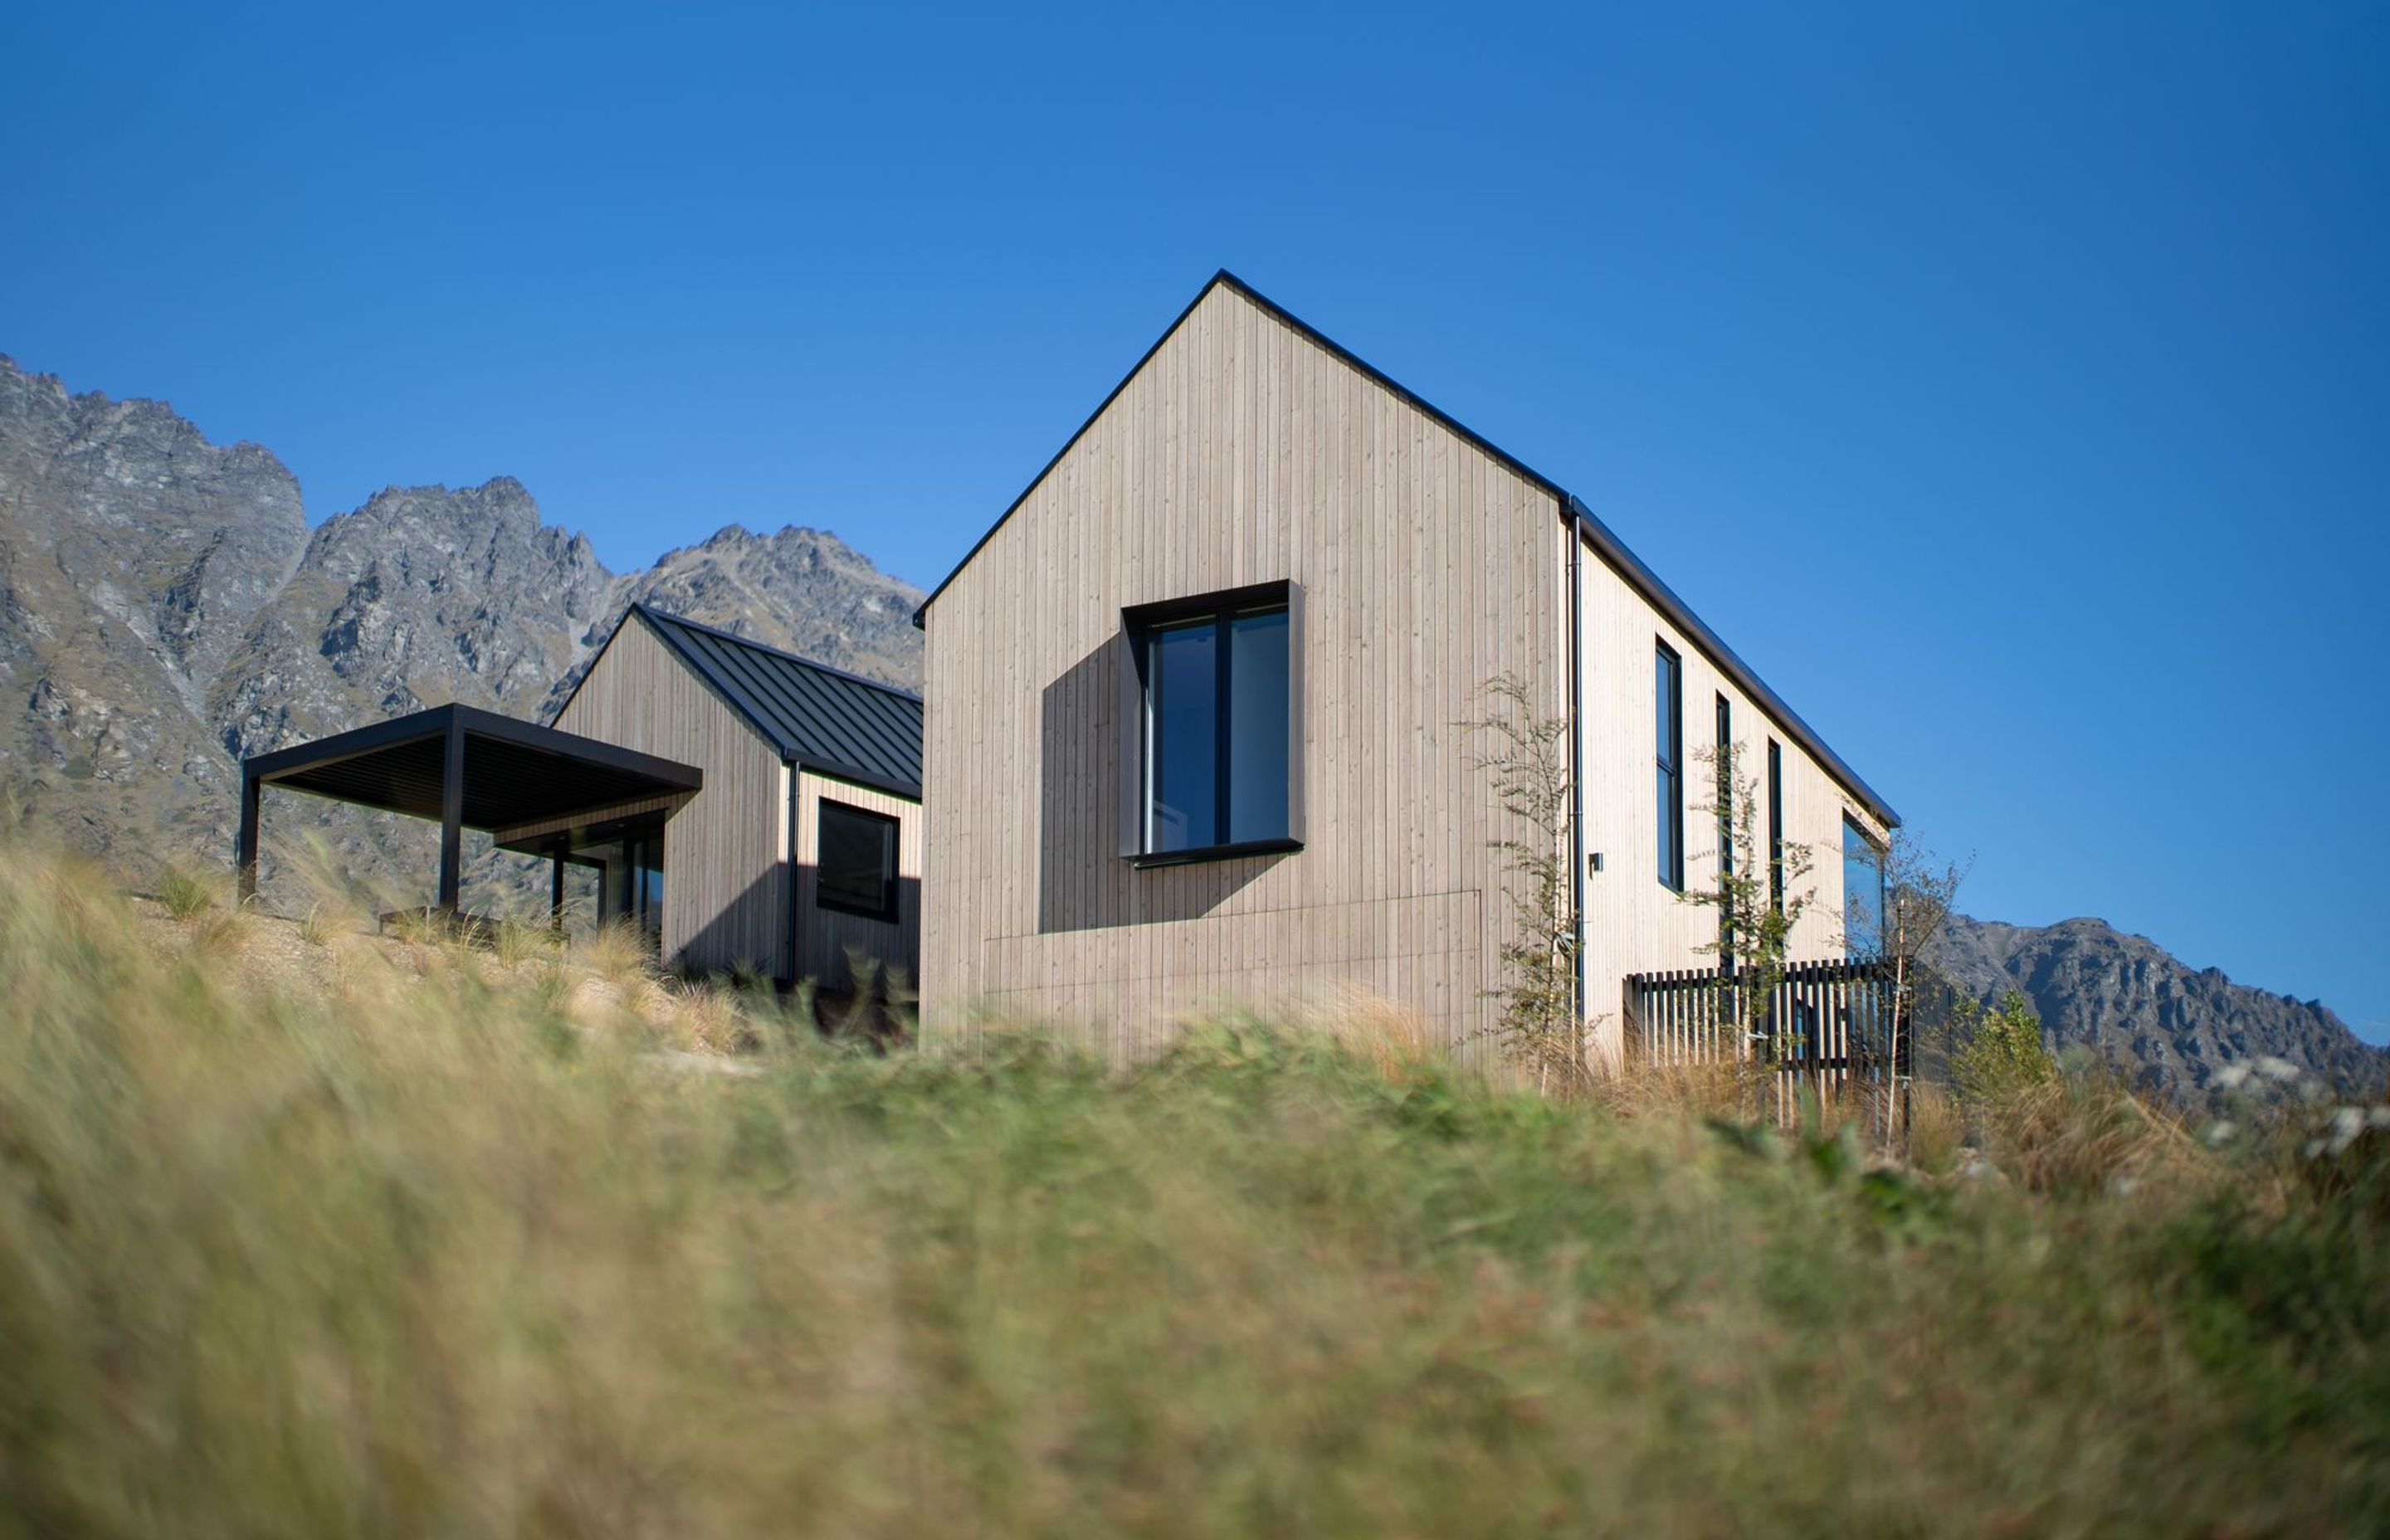 The exterior was clad entirely in timber, to integrate the two building forms.